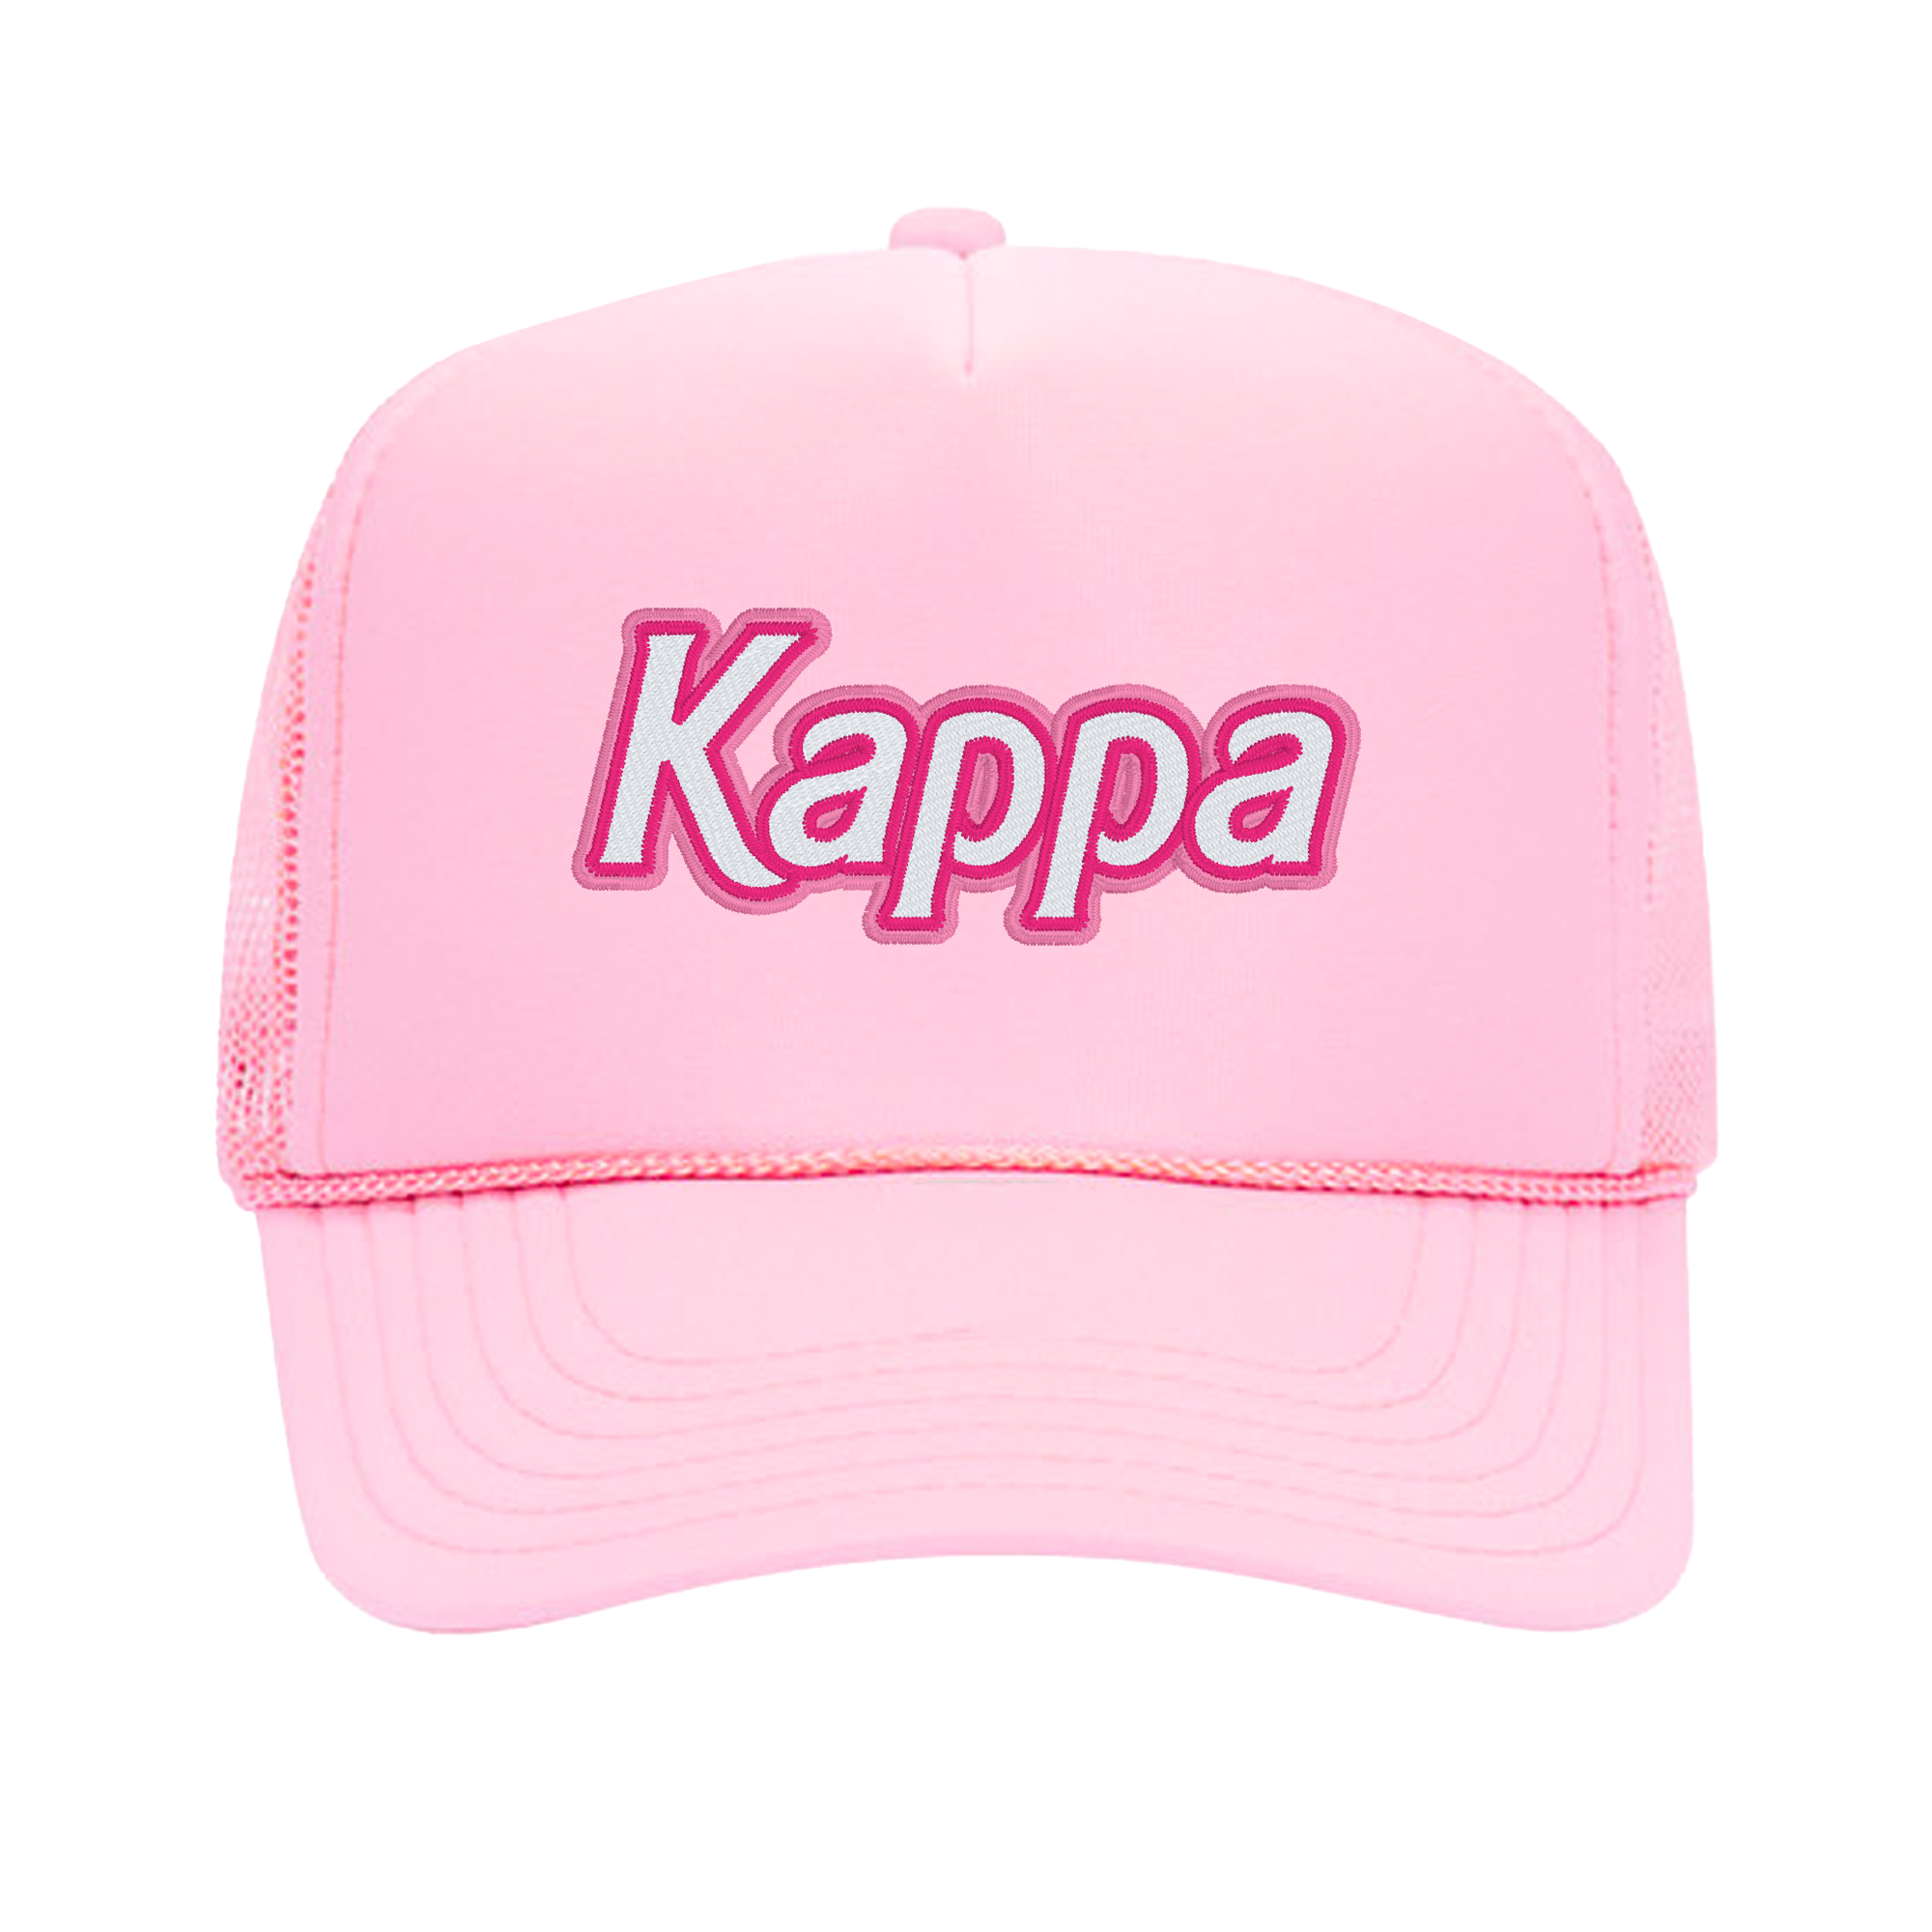 a pink cap with the word kappa on it